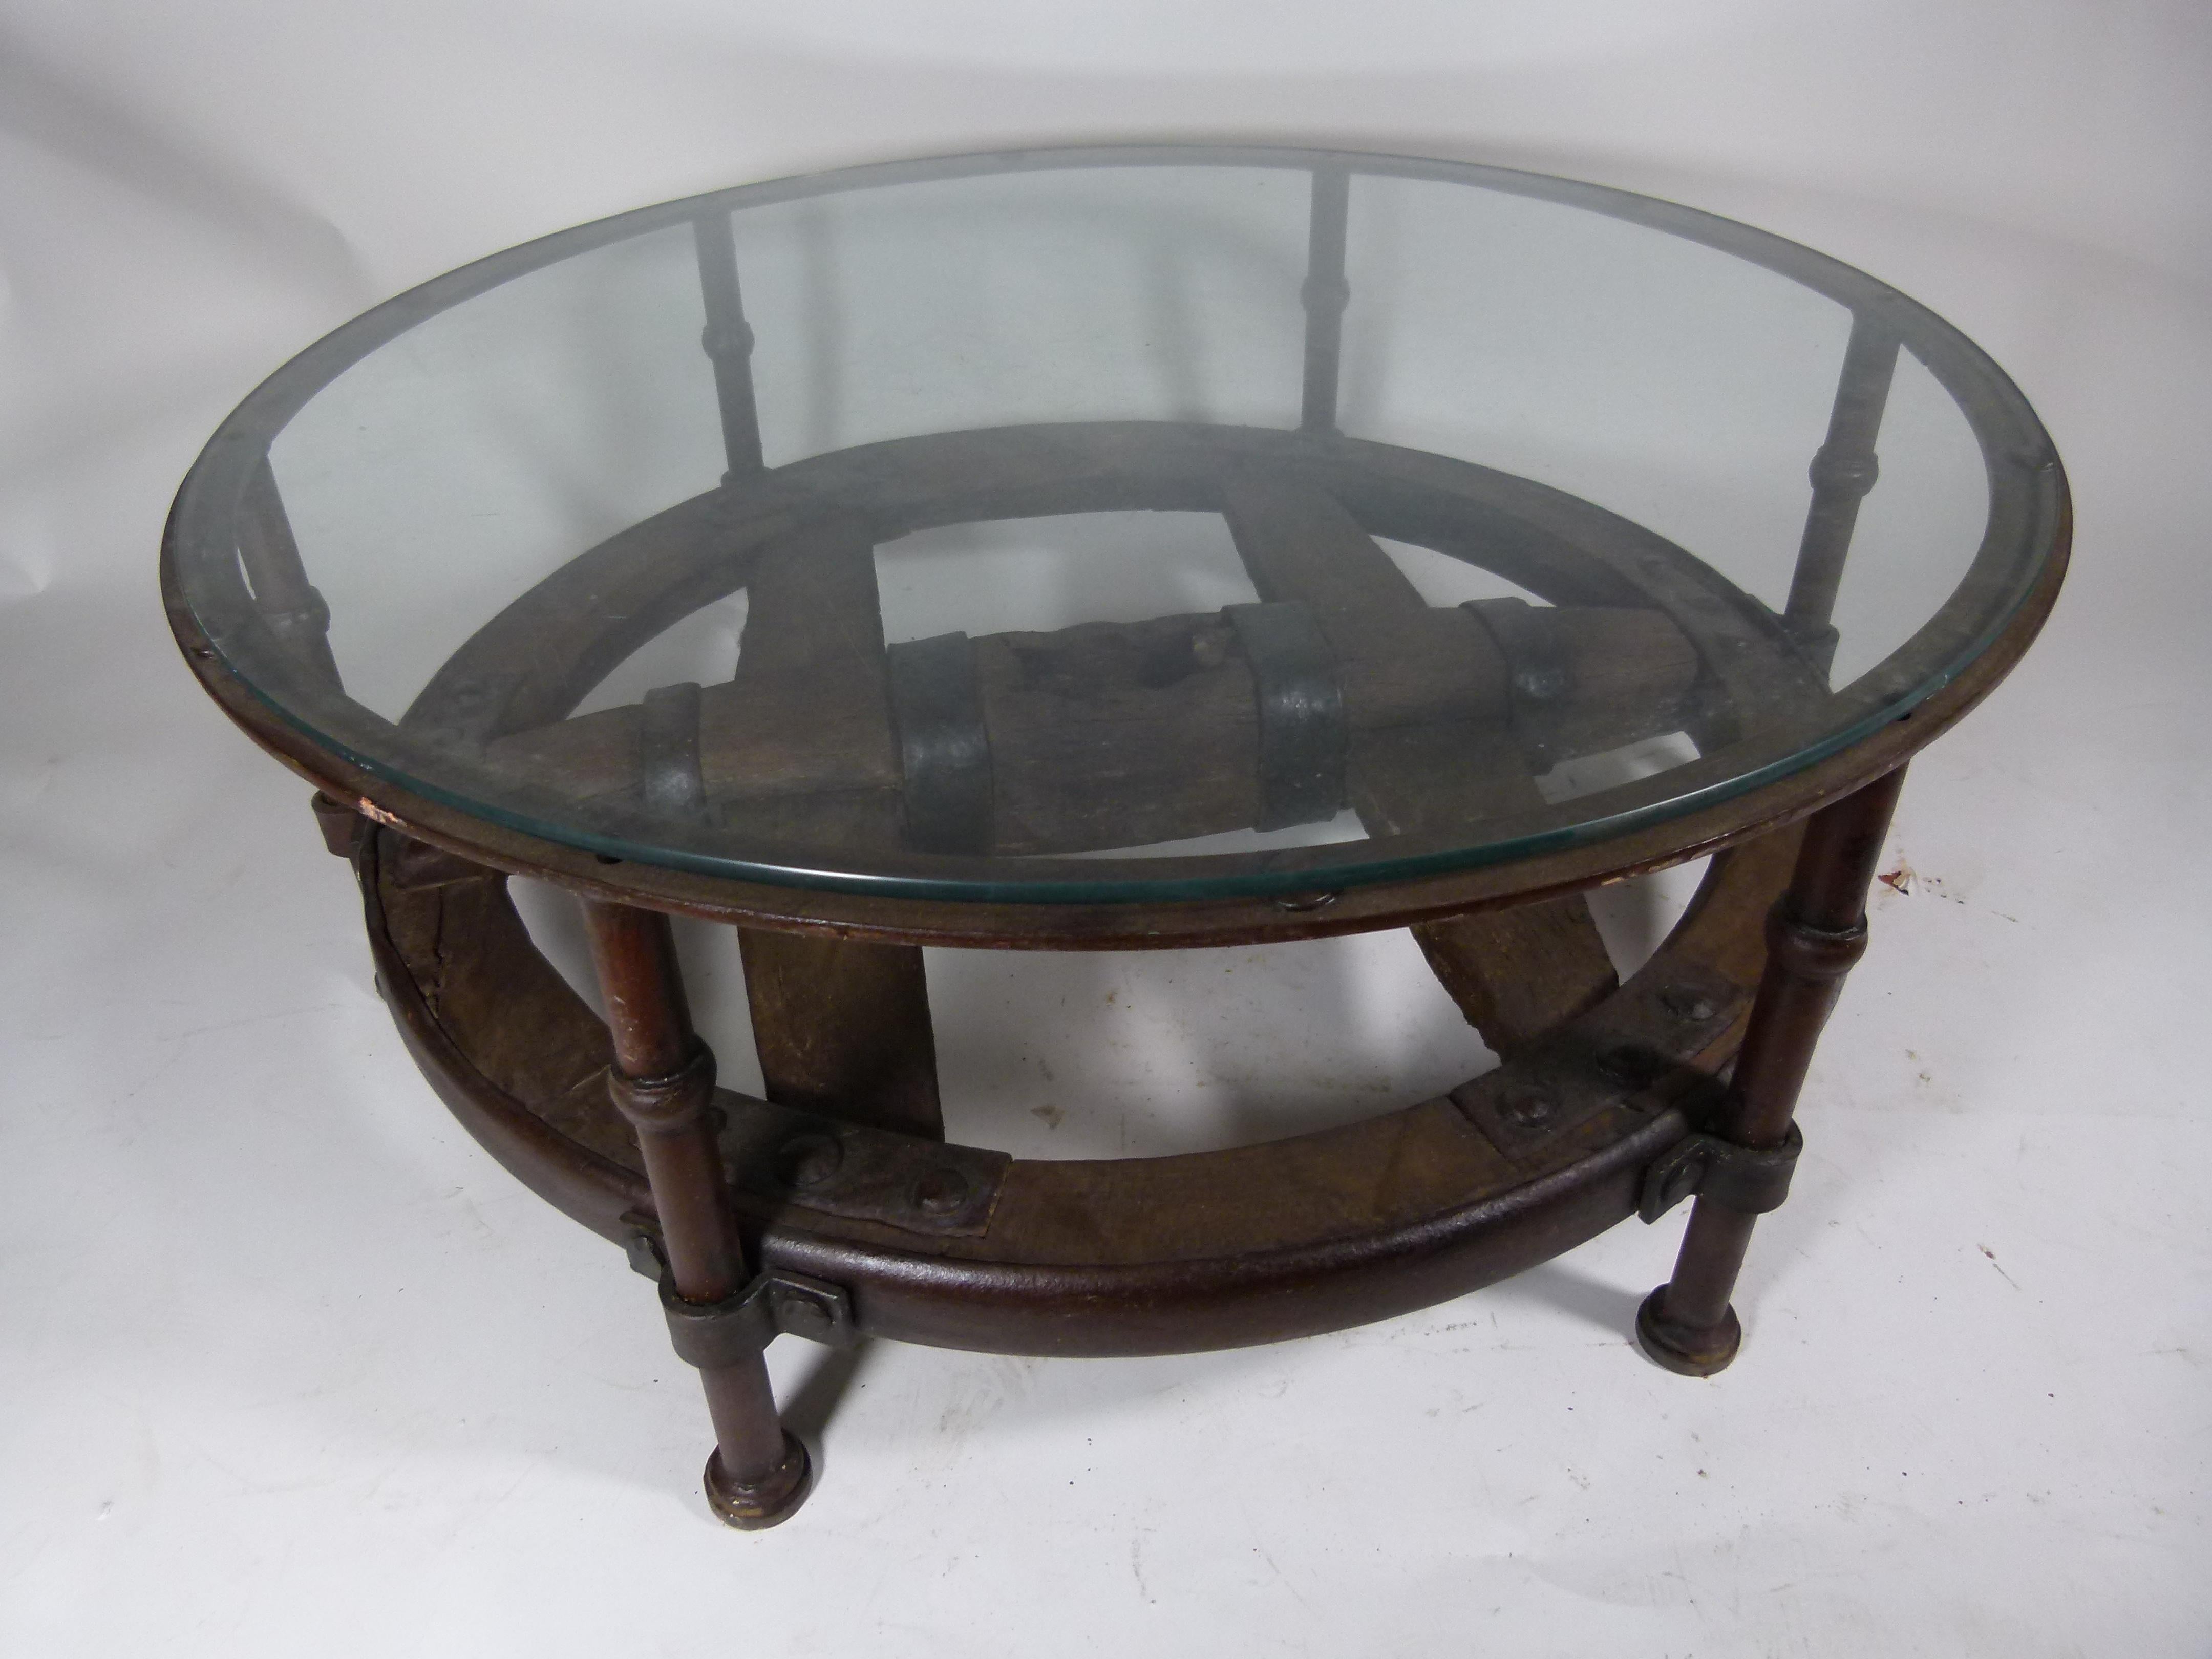 This wonderful side table consist of an antique Spanish 17th century cart-wheel which was named: 